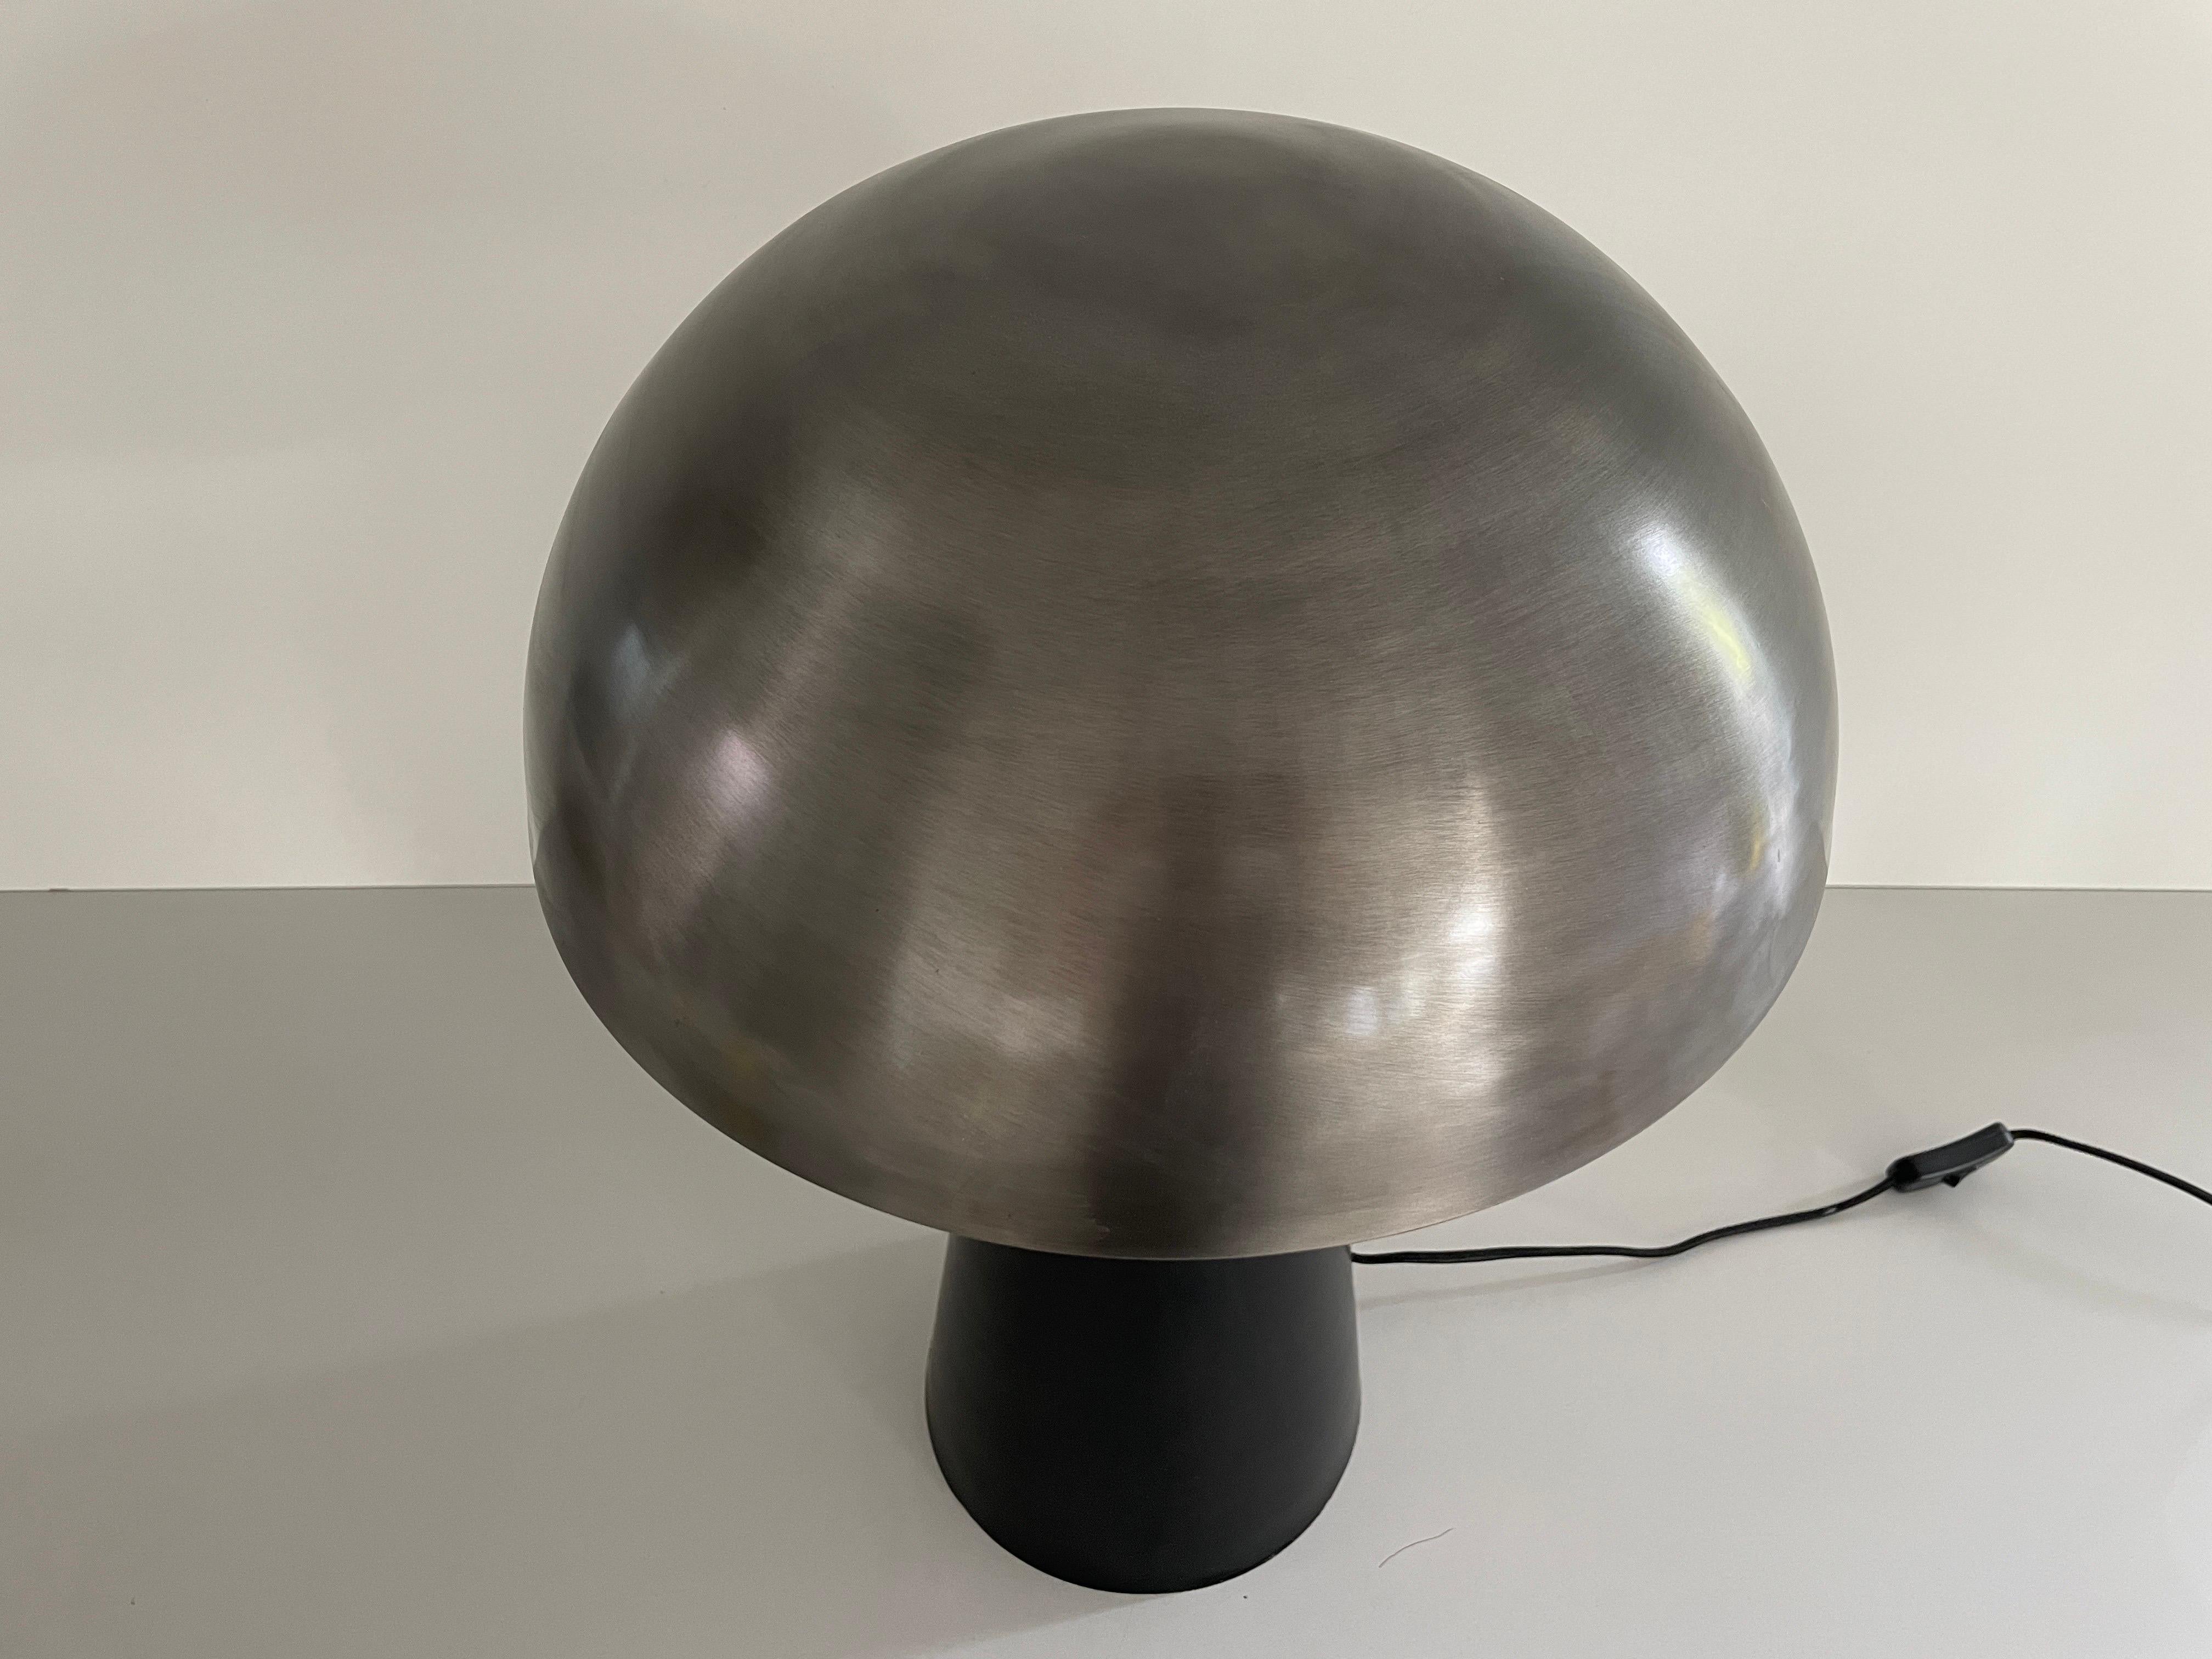 Metal Muschroom and Conic Design Large Table Lamp by LAMBERT, 1980s, Germany For Sale